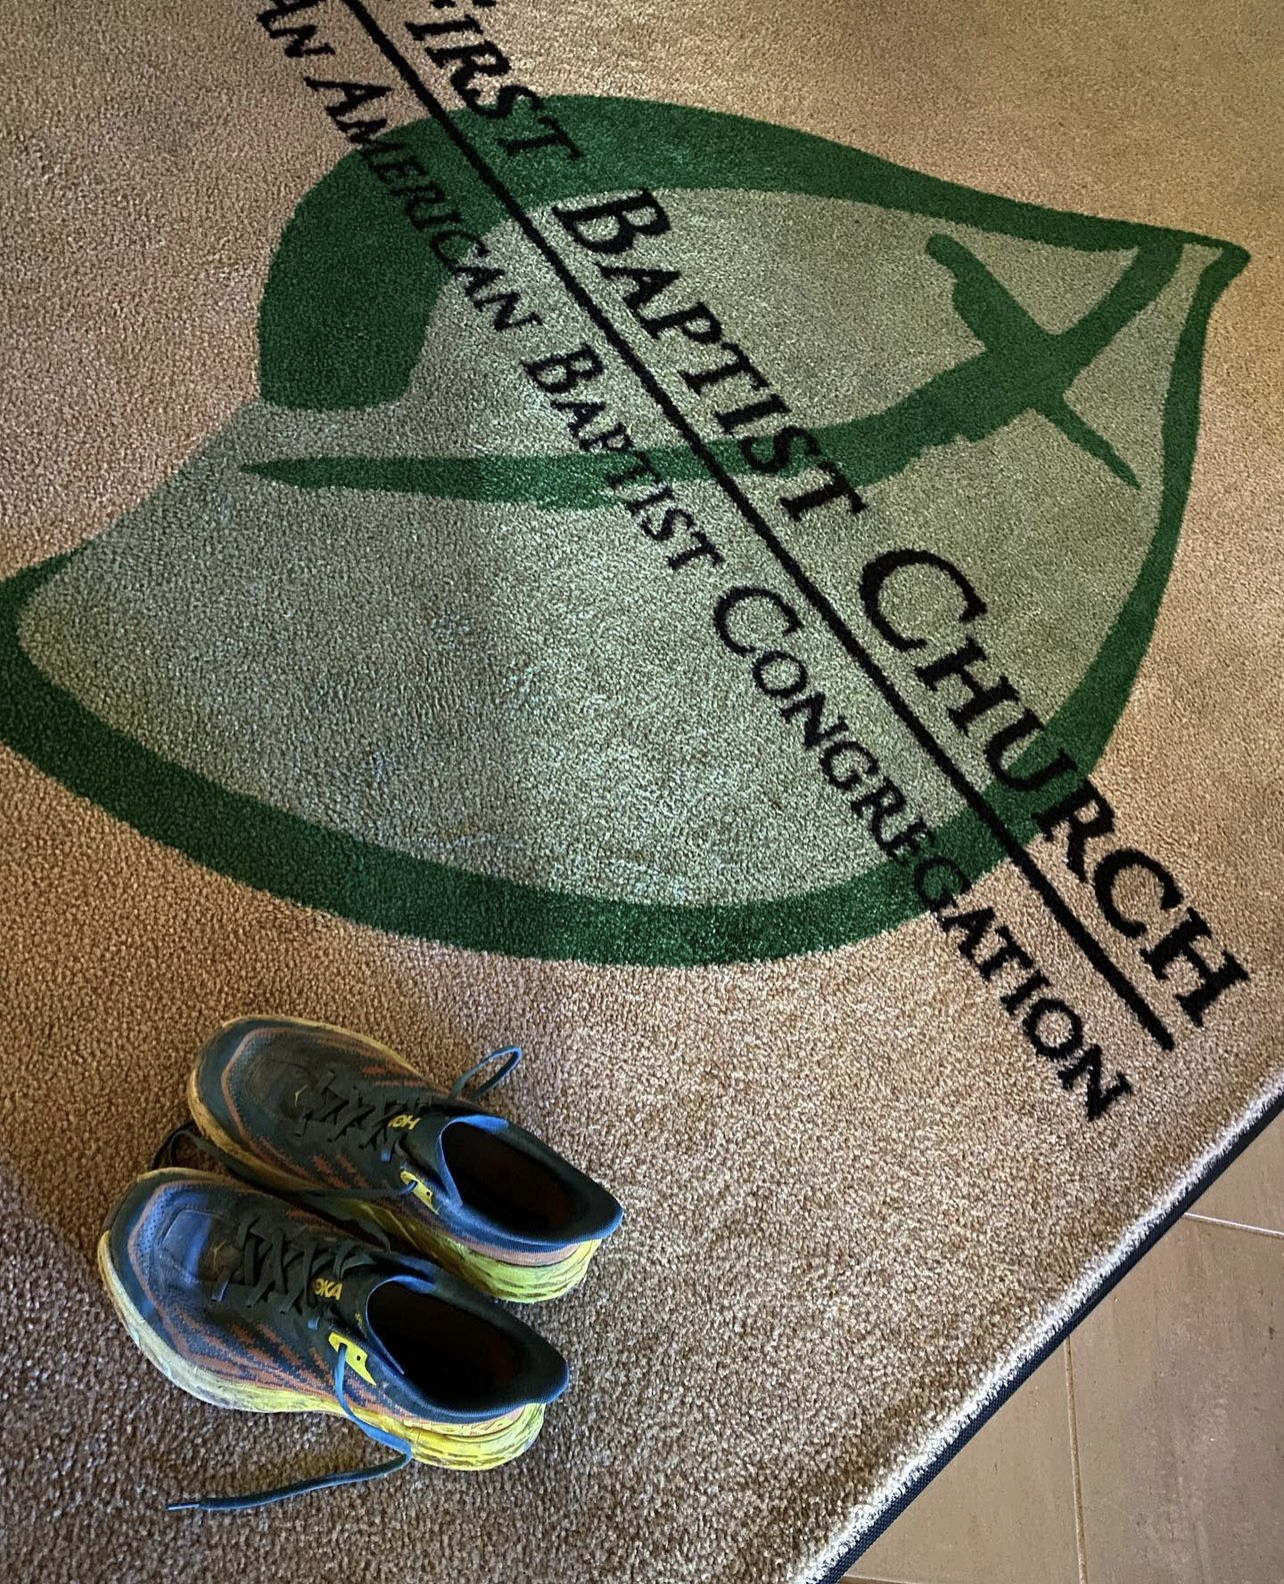 A photo of Pastor Matt's blue, orange, and yellow trail running shoes, on a rug with a leaf logo that reads "First Baptist Church, An American Baptist Congregation."